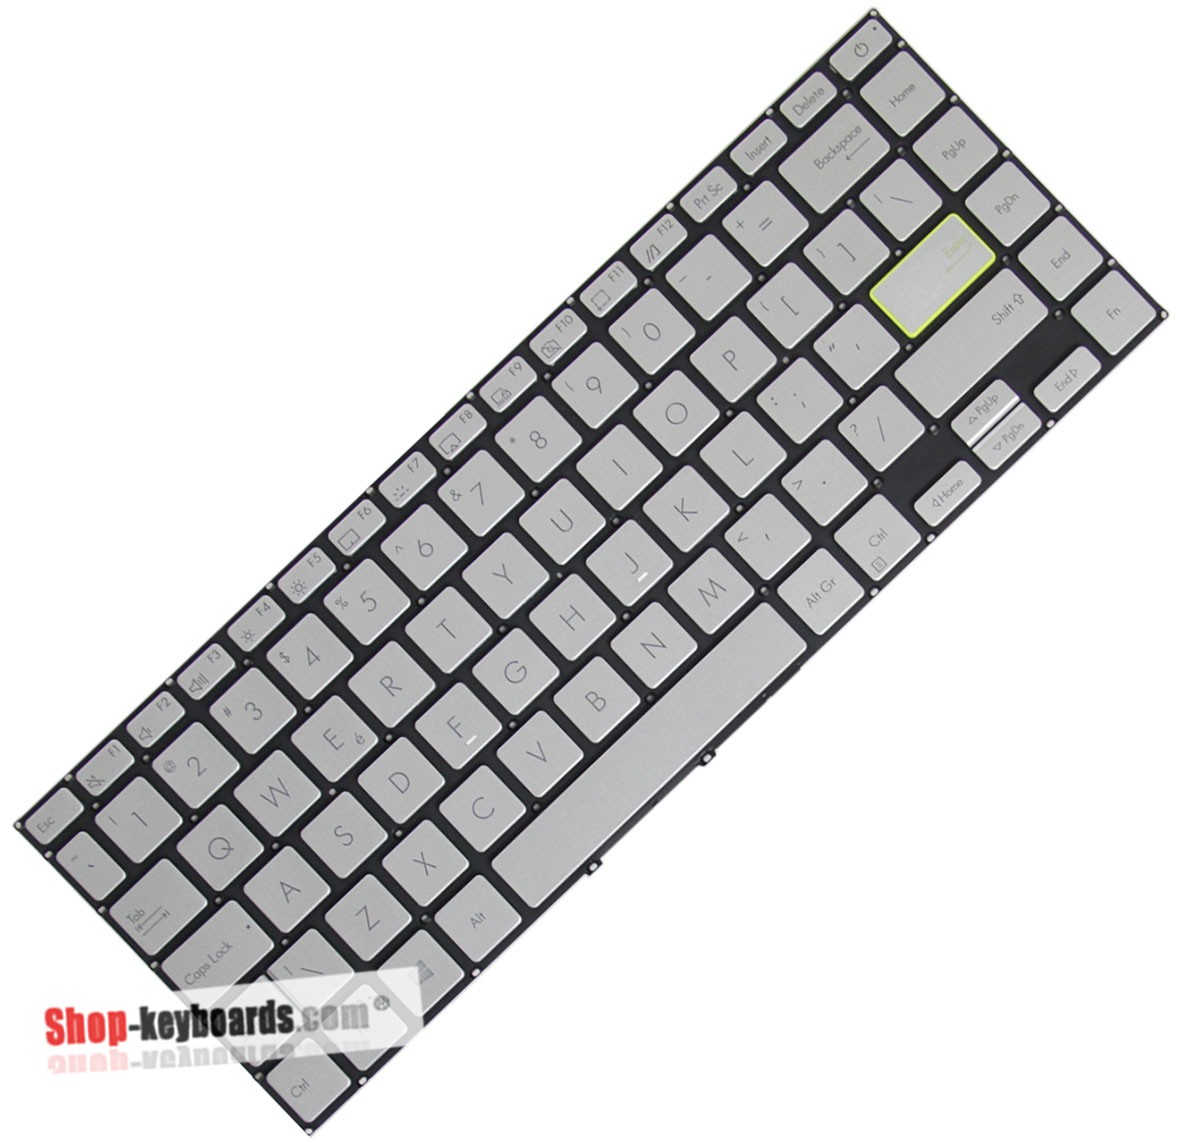 Asus S433FL Keyboard replacement